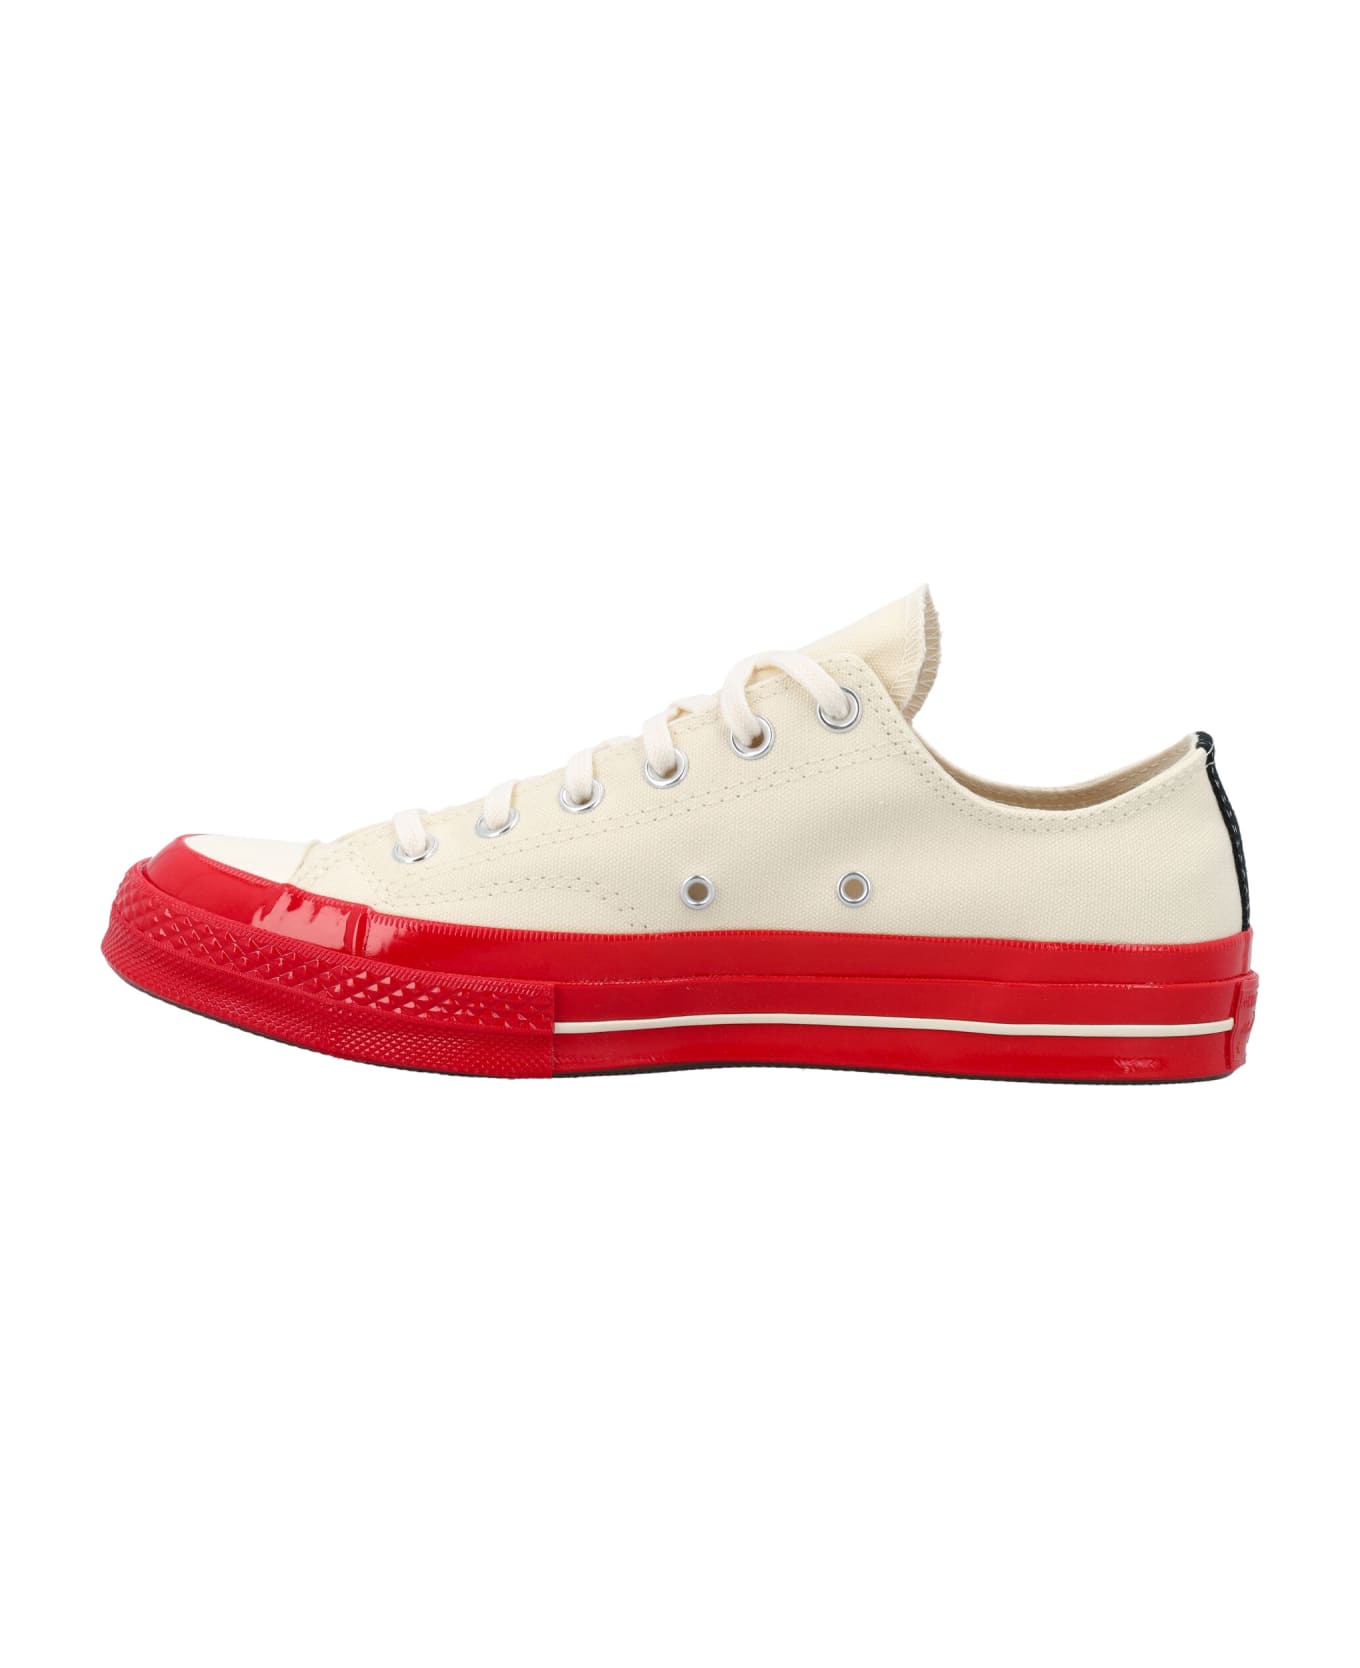 Comme des Garçons Chuck 70 Low-top Red Sole Sneakers - OFF WHITE スニーカー